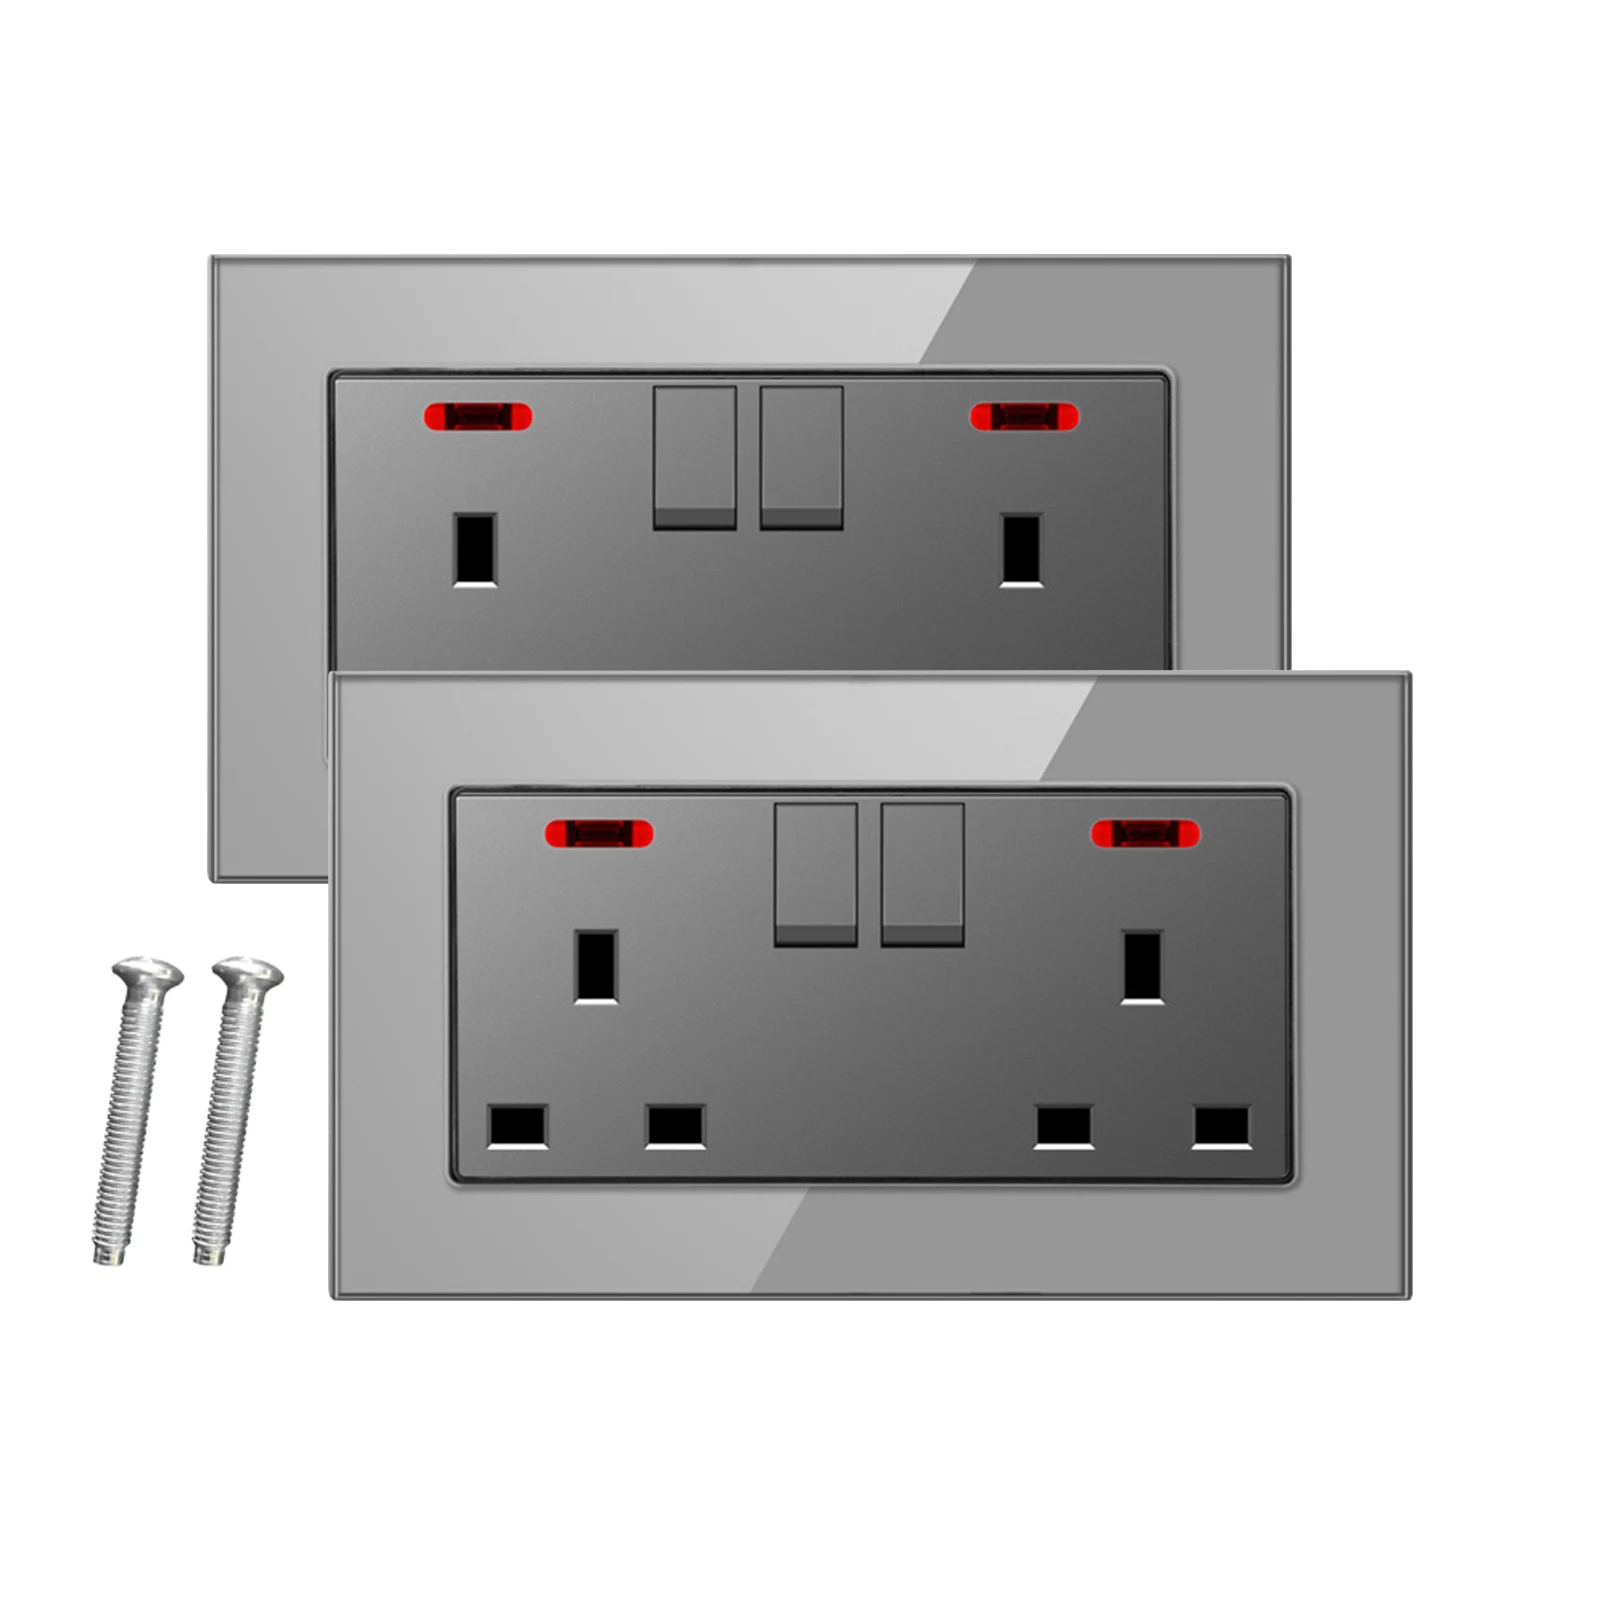 

2pcs Grey Double Switched Electrical Evolve Wall Mounted Kitchen Home 2 USB Ports Dual Plug Office Electric Outlet Power Socket